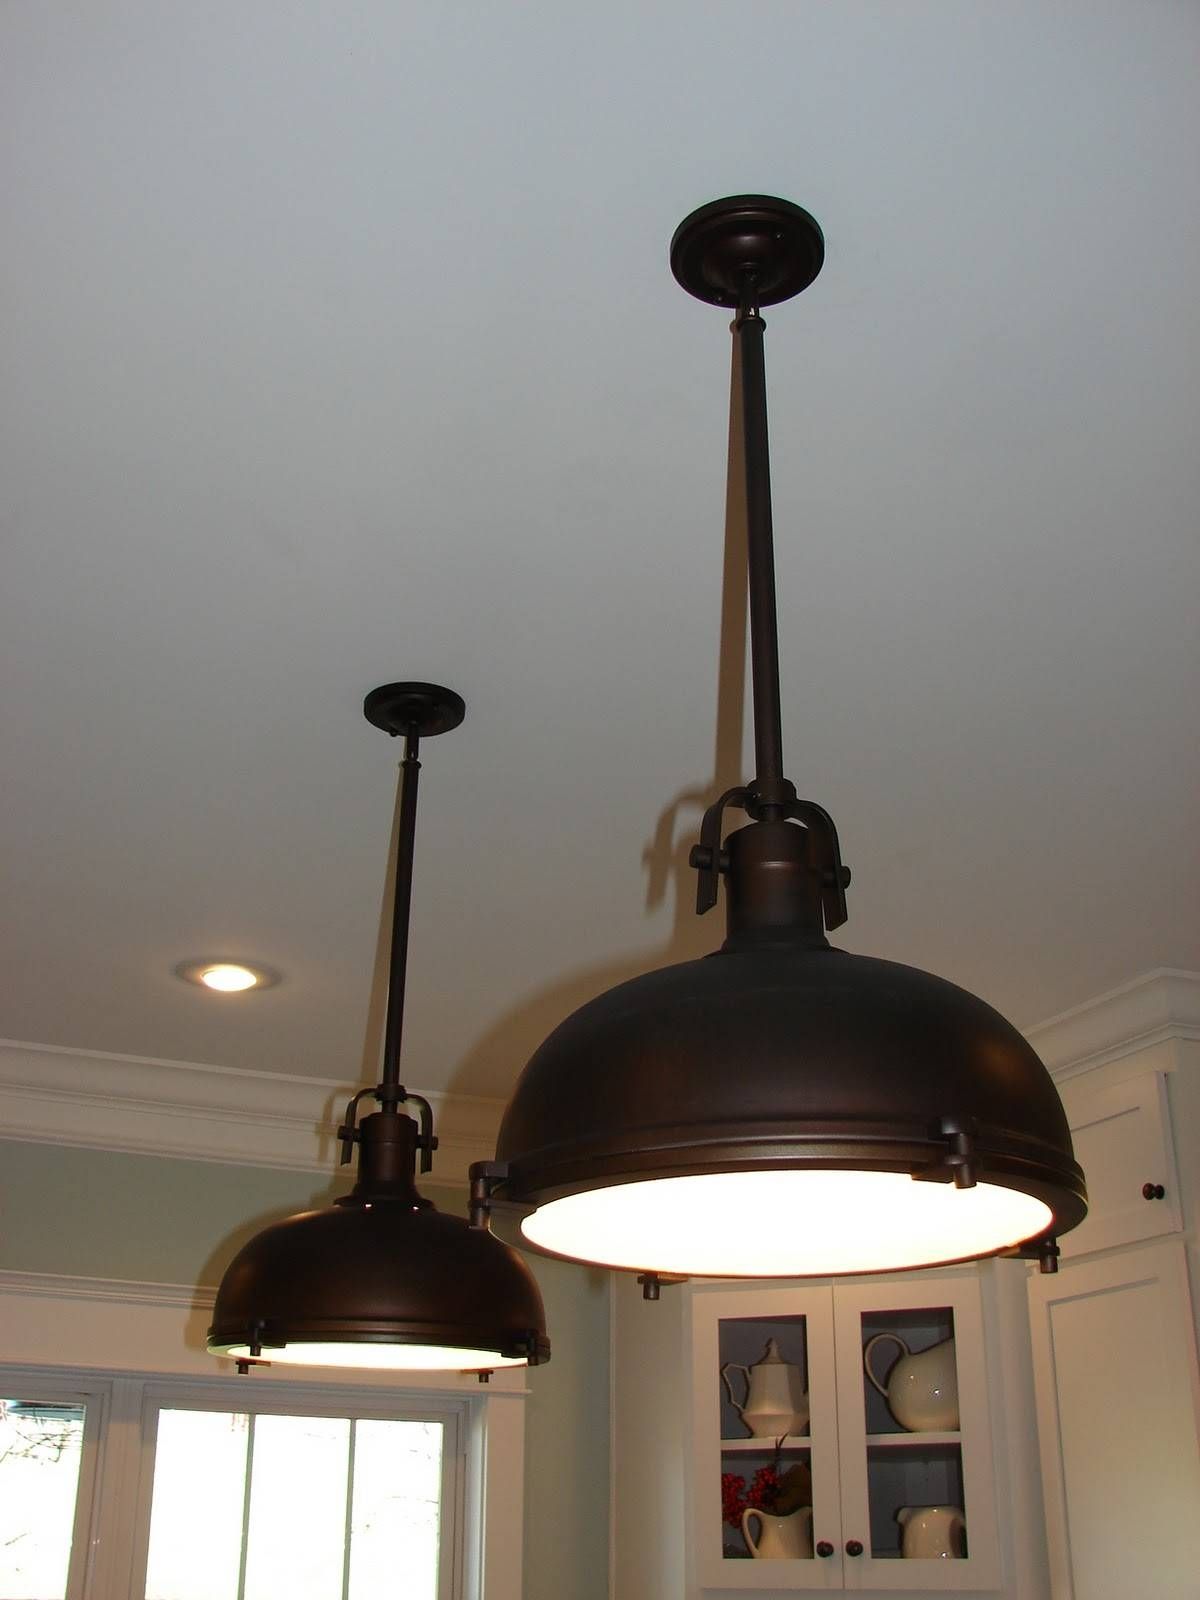 Amusing Pendant Lights Lowes 41 About Remodel Ceiling Light With With Pull Chain Pendant Lights (View 10 of 15)